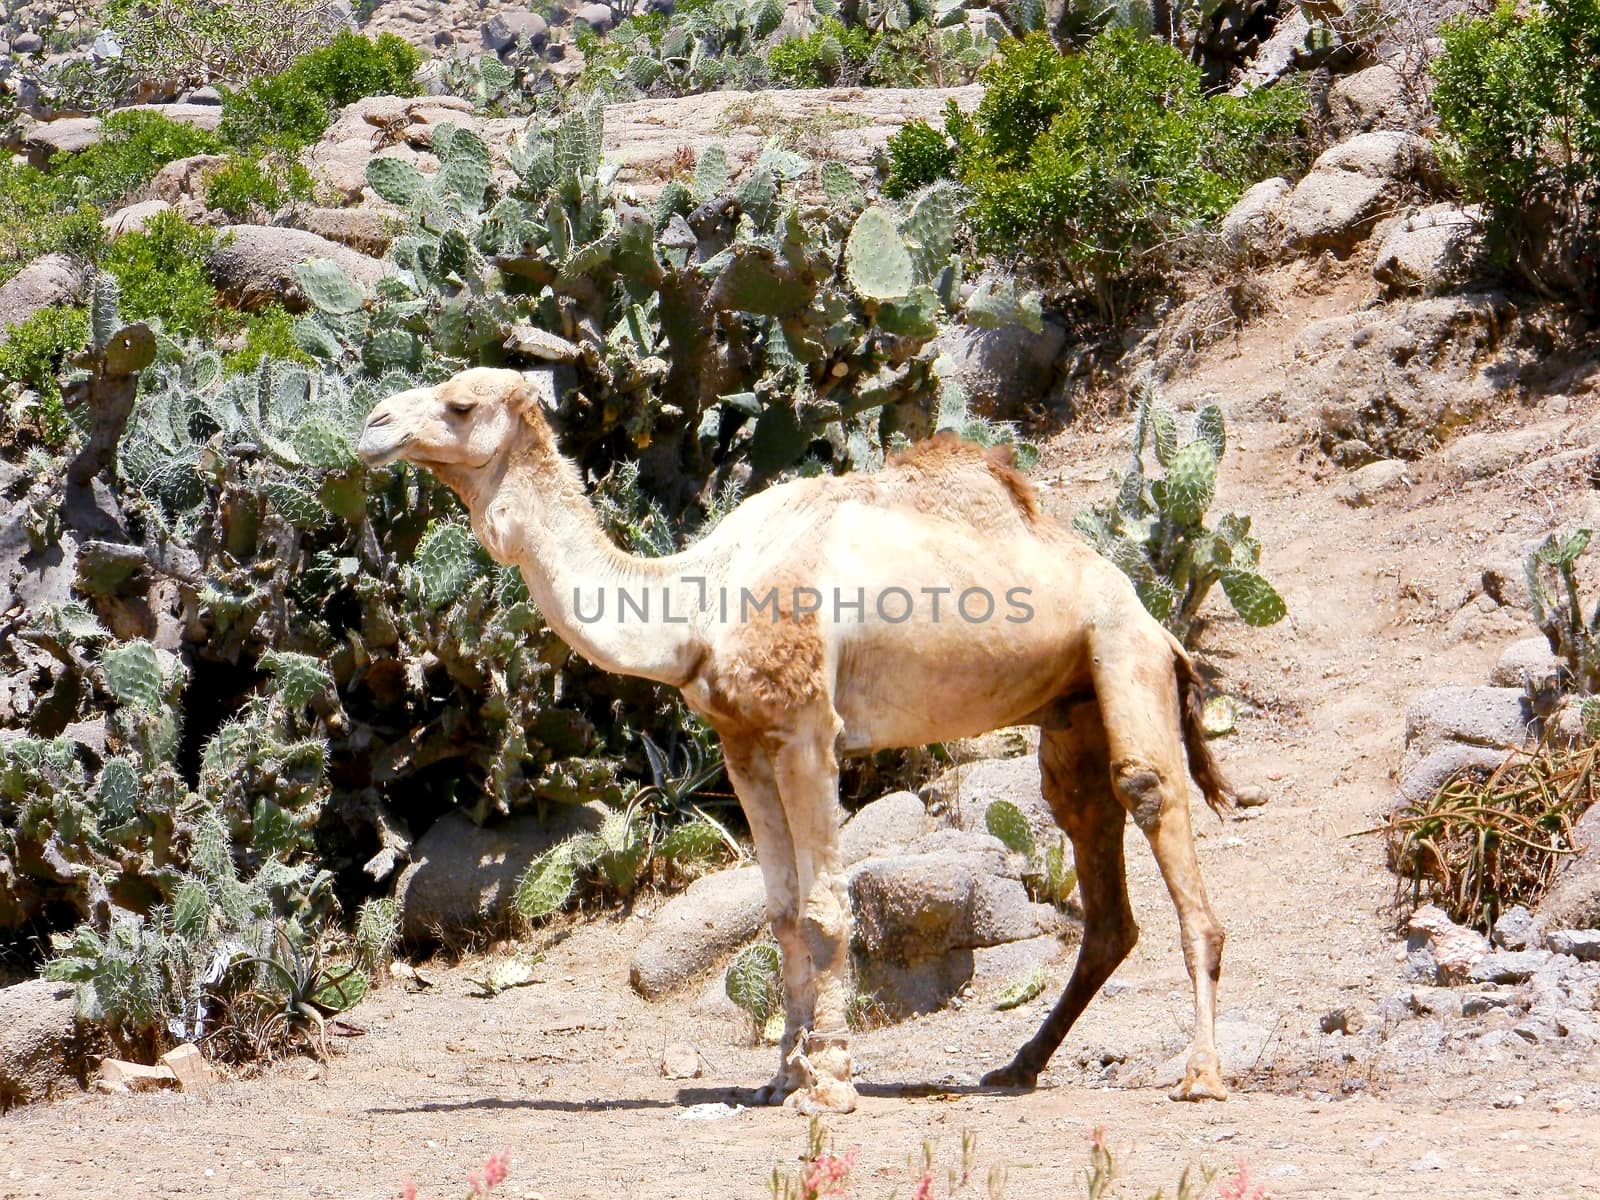 Tesseney, Eritrea - 10/11/2020: Beautiful photography of the landscape from the villages near the bord from Ethiopia. Old desert villages with some domestic animals.